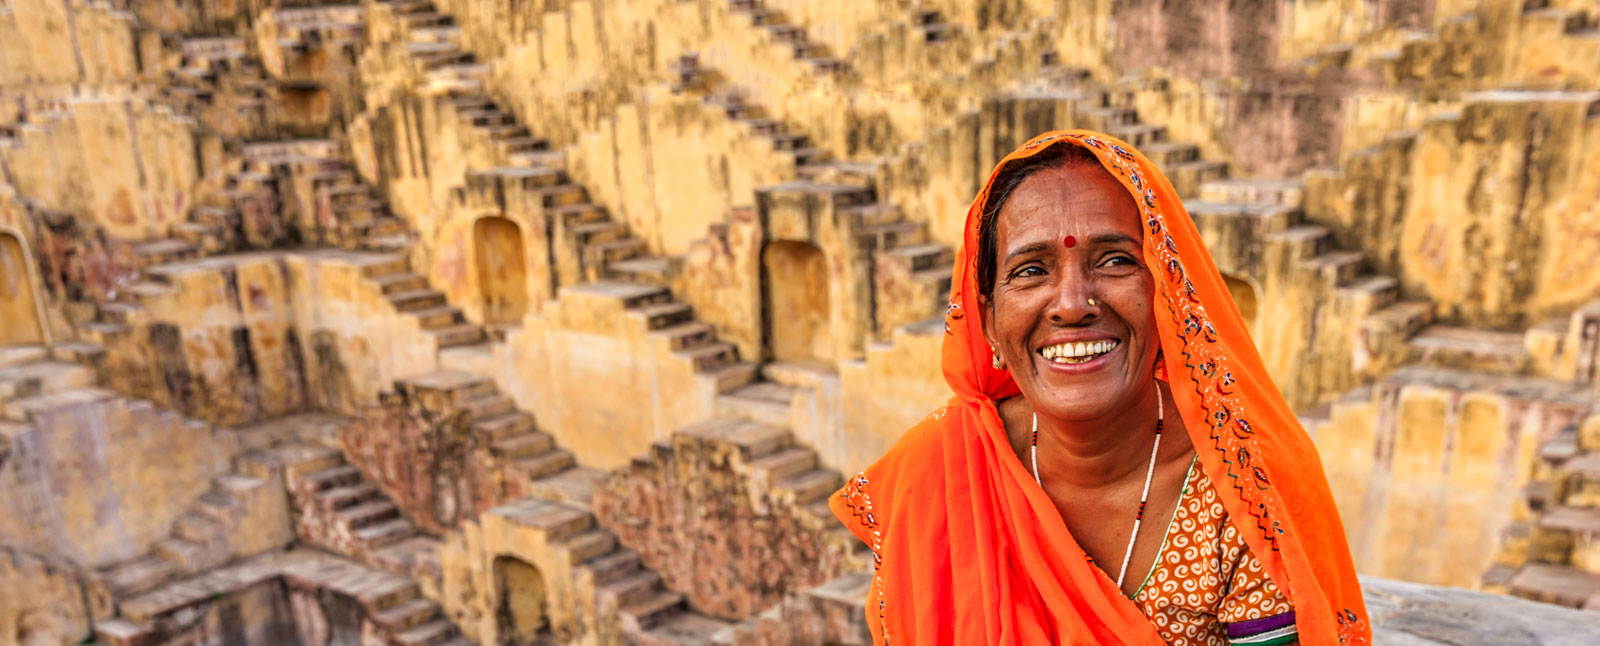 Indian woman resting inside stepwell in village near Jaipur, Rajasthan, India.